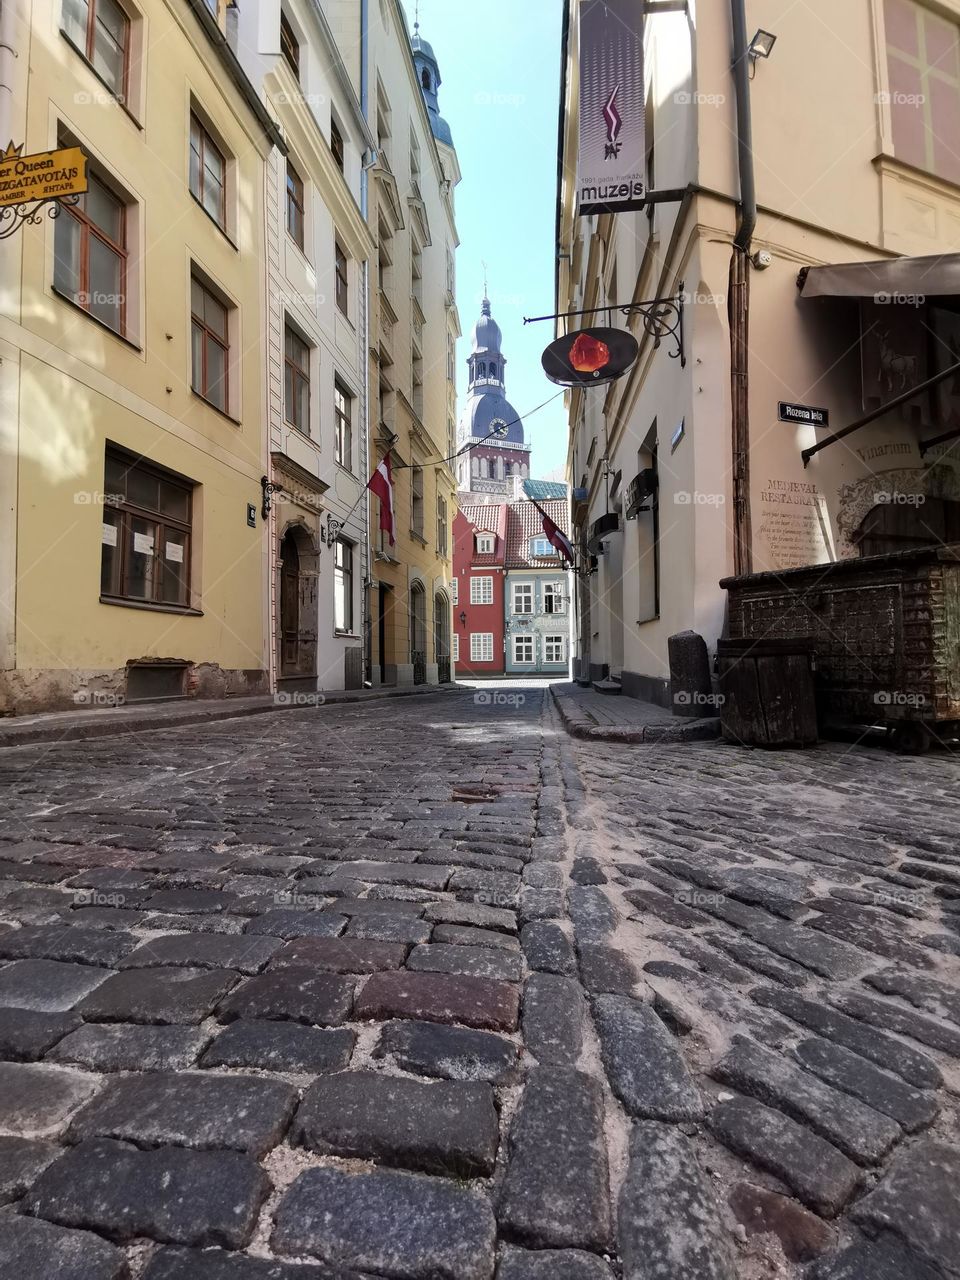 Latvia, Riga, street photo. Old Town Riga. Paving stones. Cathedral. 
Unusual shooting angle. Shooting from below. Down up. From the ground up...